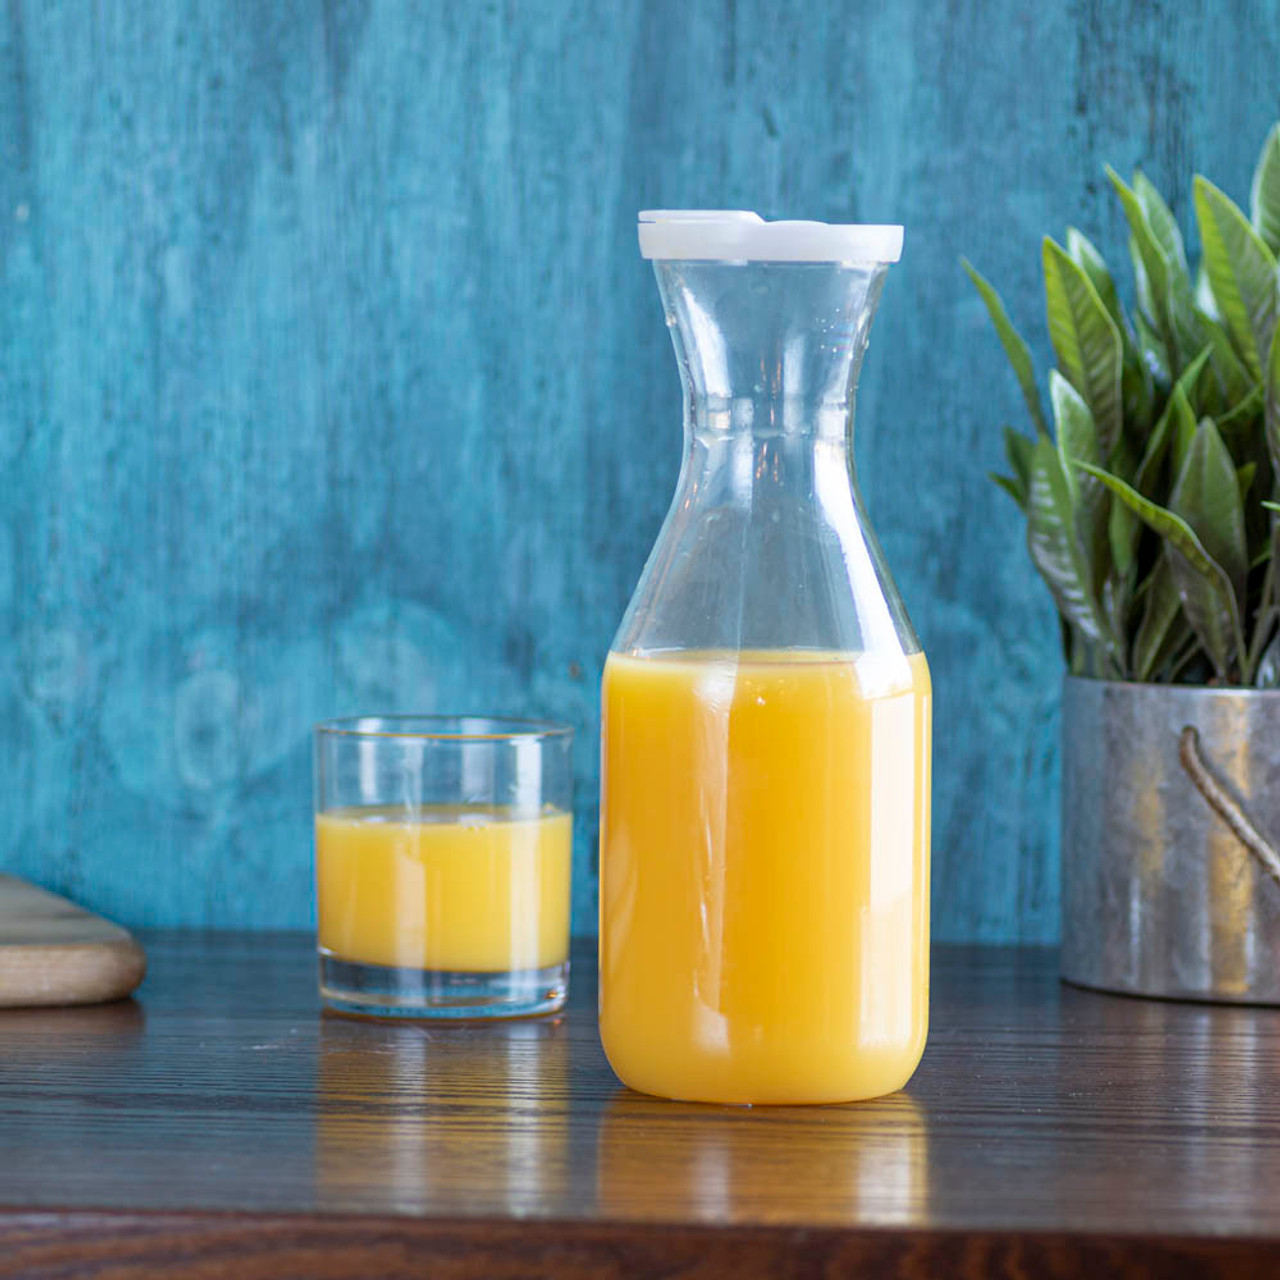 https://cdn11.bigcommerce.com/s-cznxq08r7/images/stencil/1280x1280/products/1184/8126/pdt-10-polycarbonate_juice_carafe_container_with_lid_-_1_liter-3__98003.1590771731.jpg?c=1